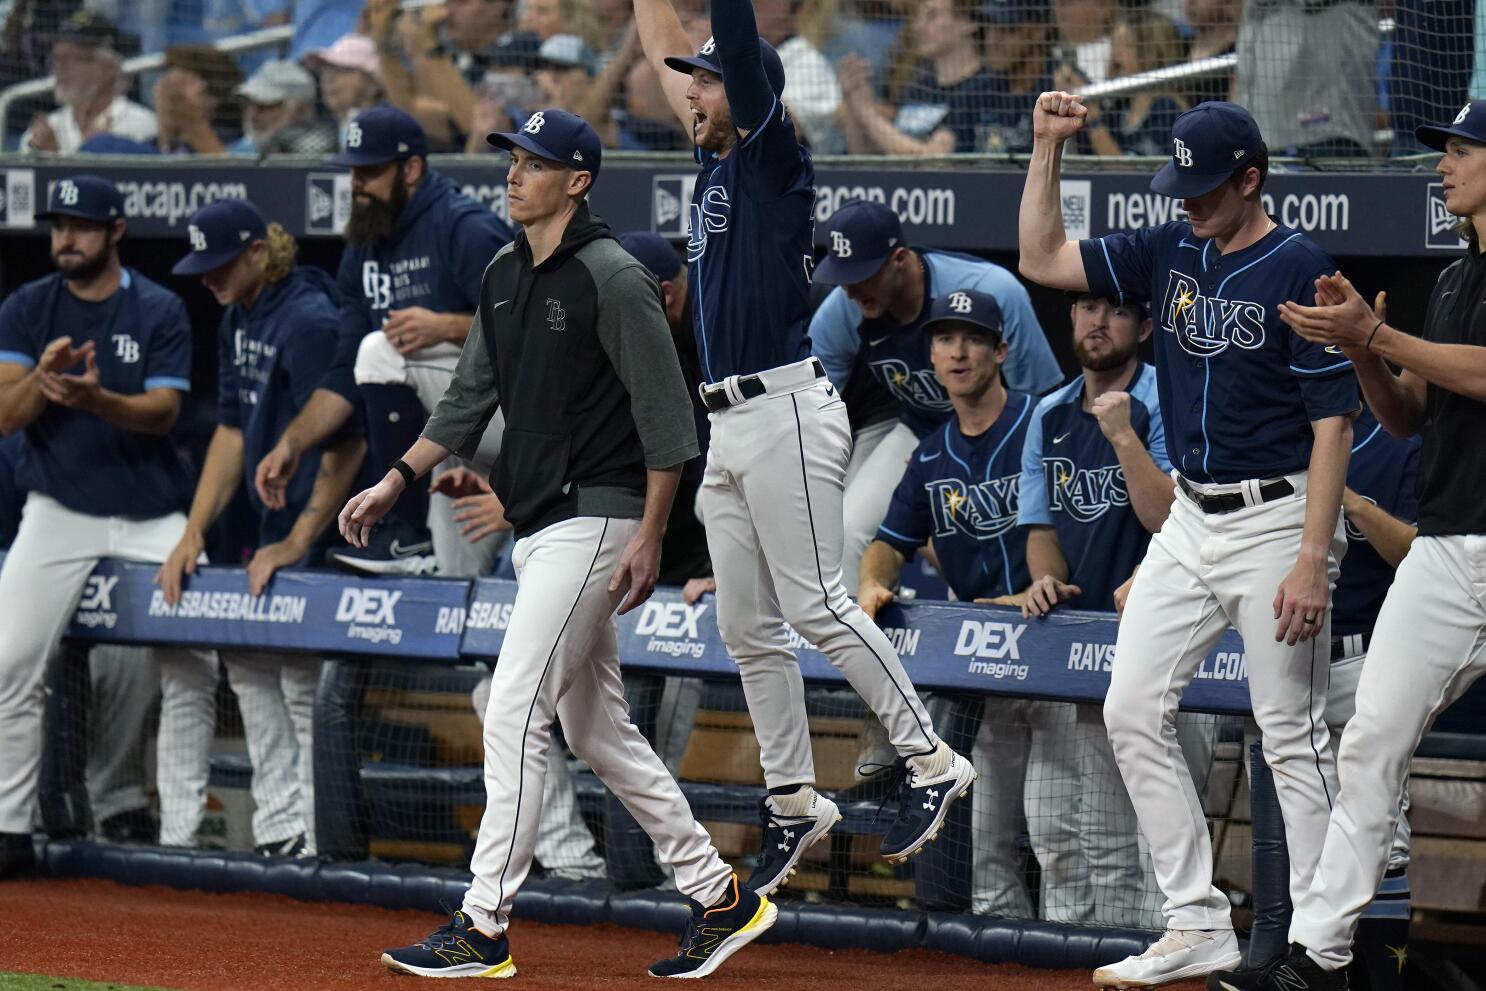 Yankees clinch first AL East title since 2012 with win over Angels